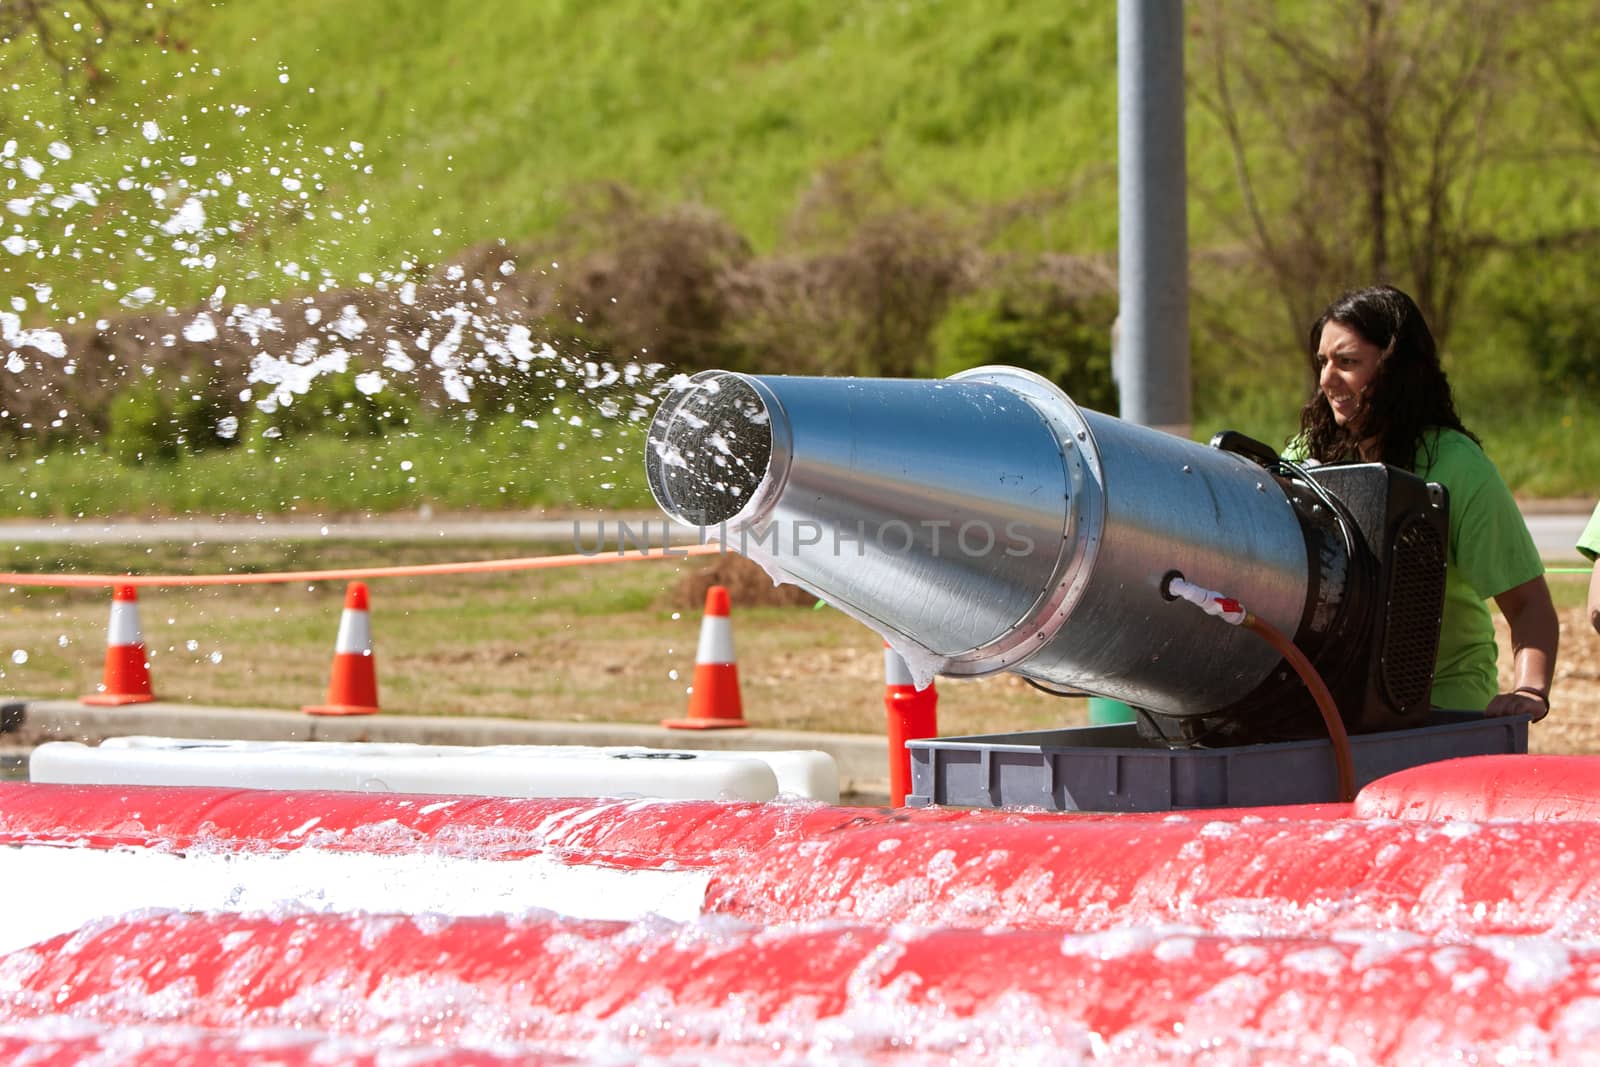 Atlanta, GA USA - April 5, 2014:  A young woman operates a large bubble machine to fill the foam pit with soap suds, at the Ridiculous Obstacle Challenge (ROC) 5K race.